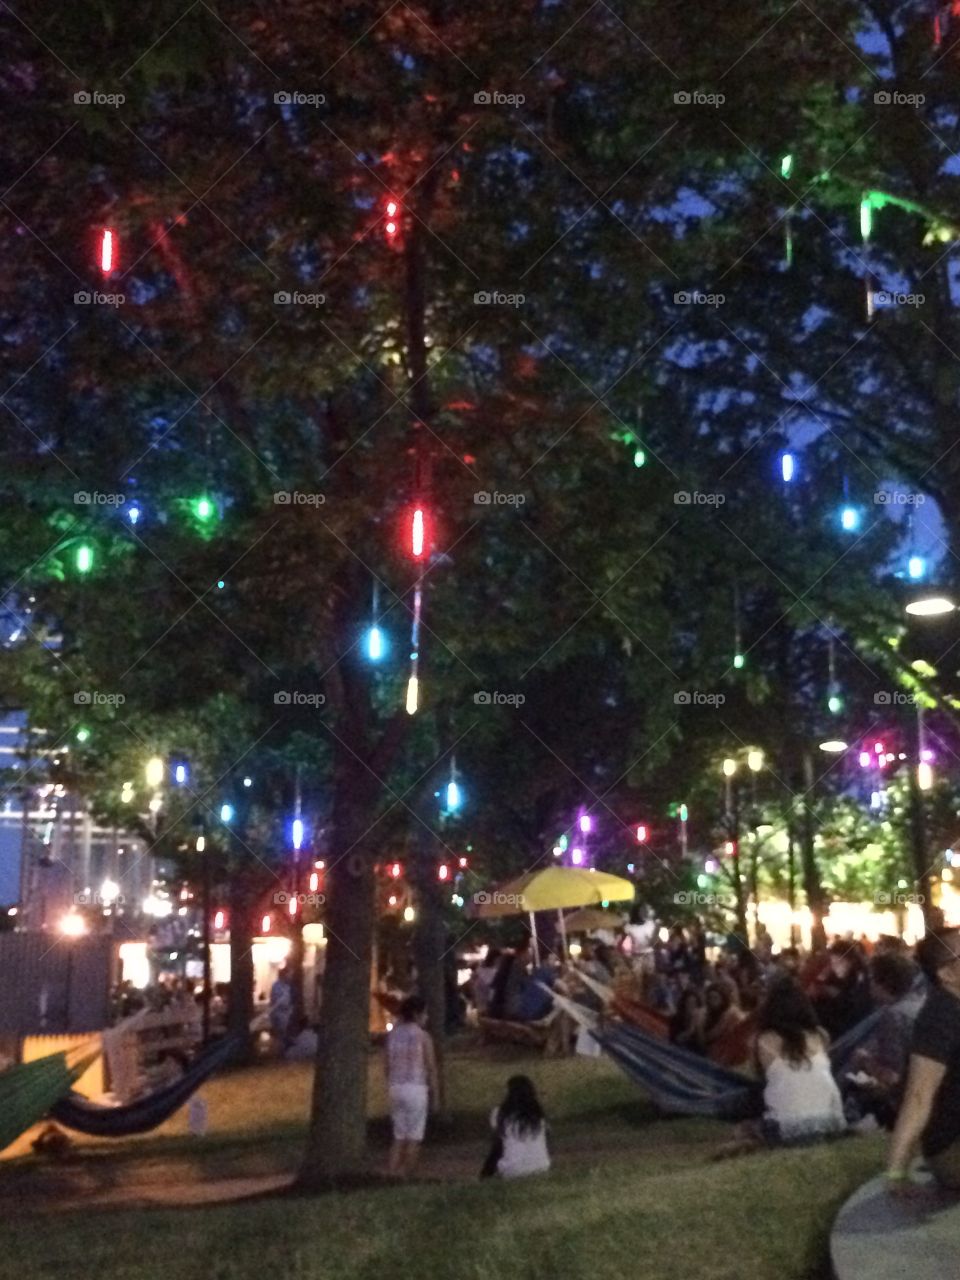 Spruce Street Harbor Park. A night in the park